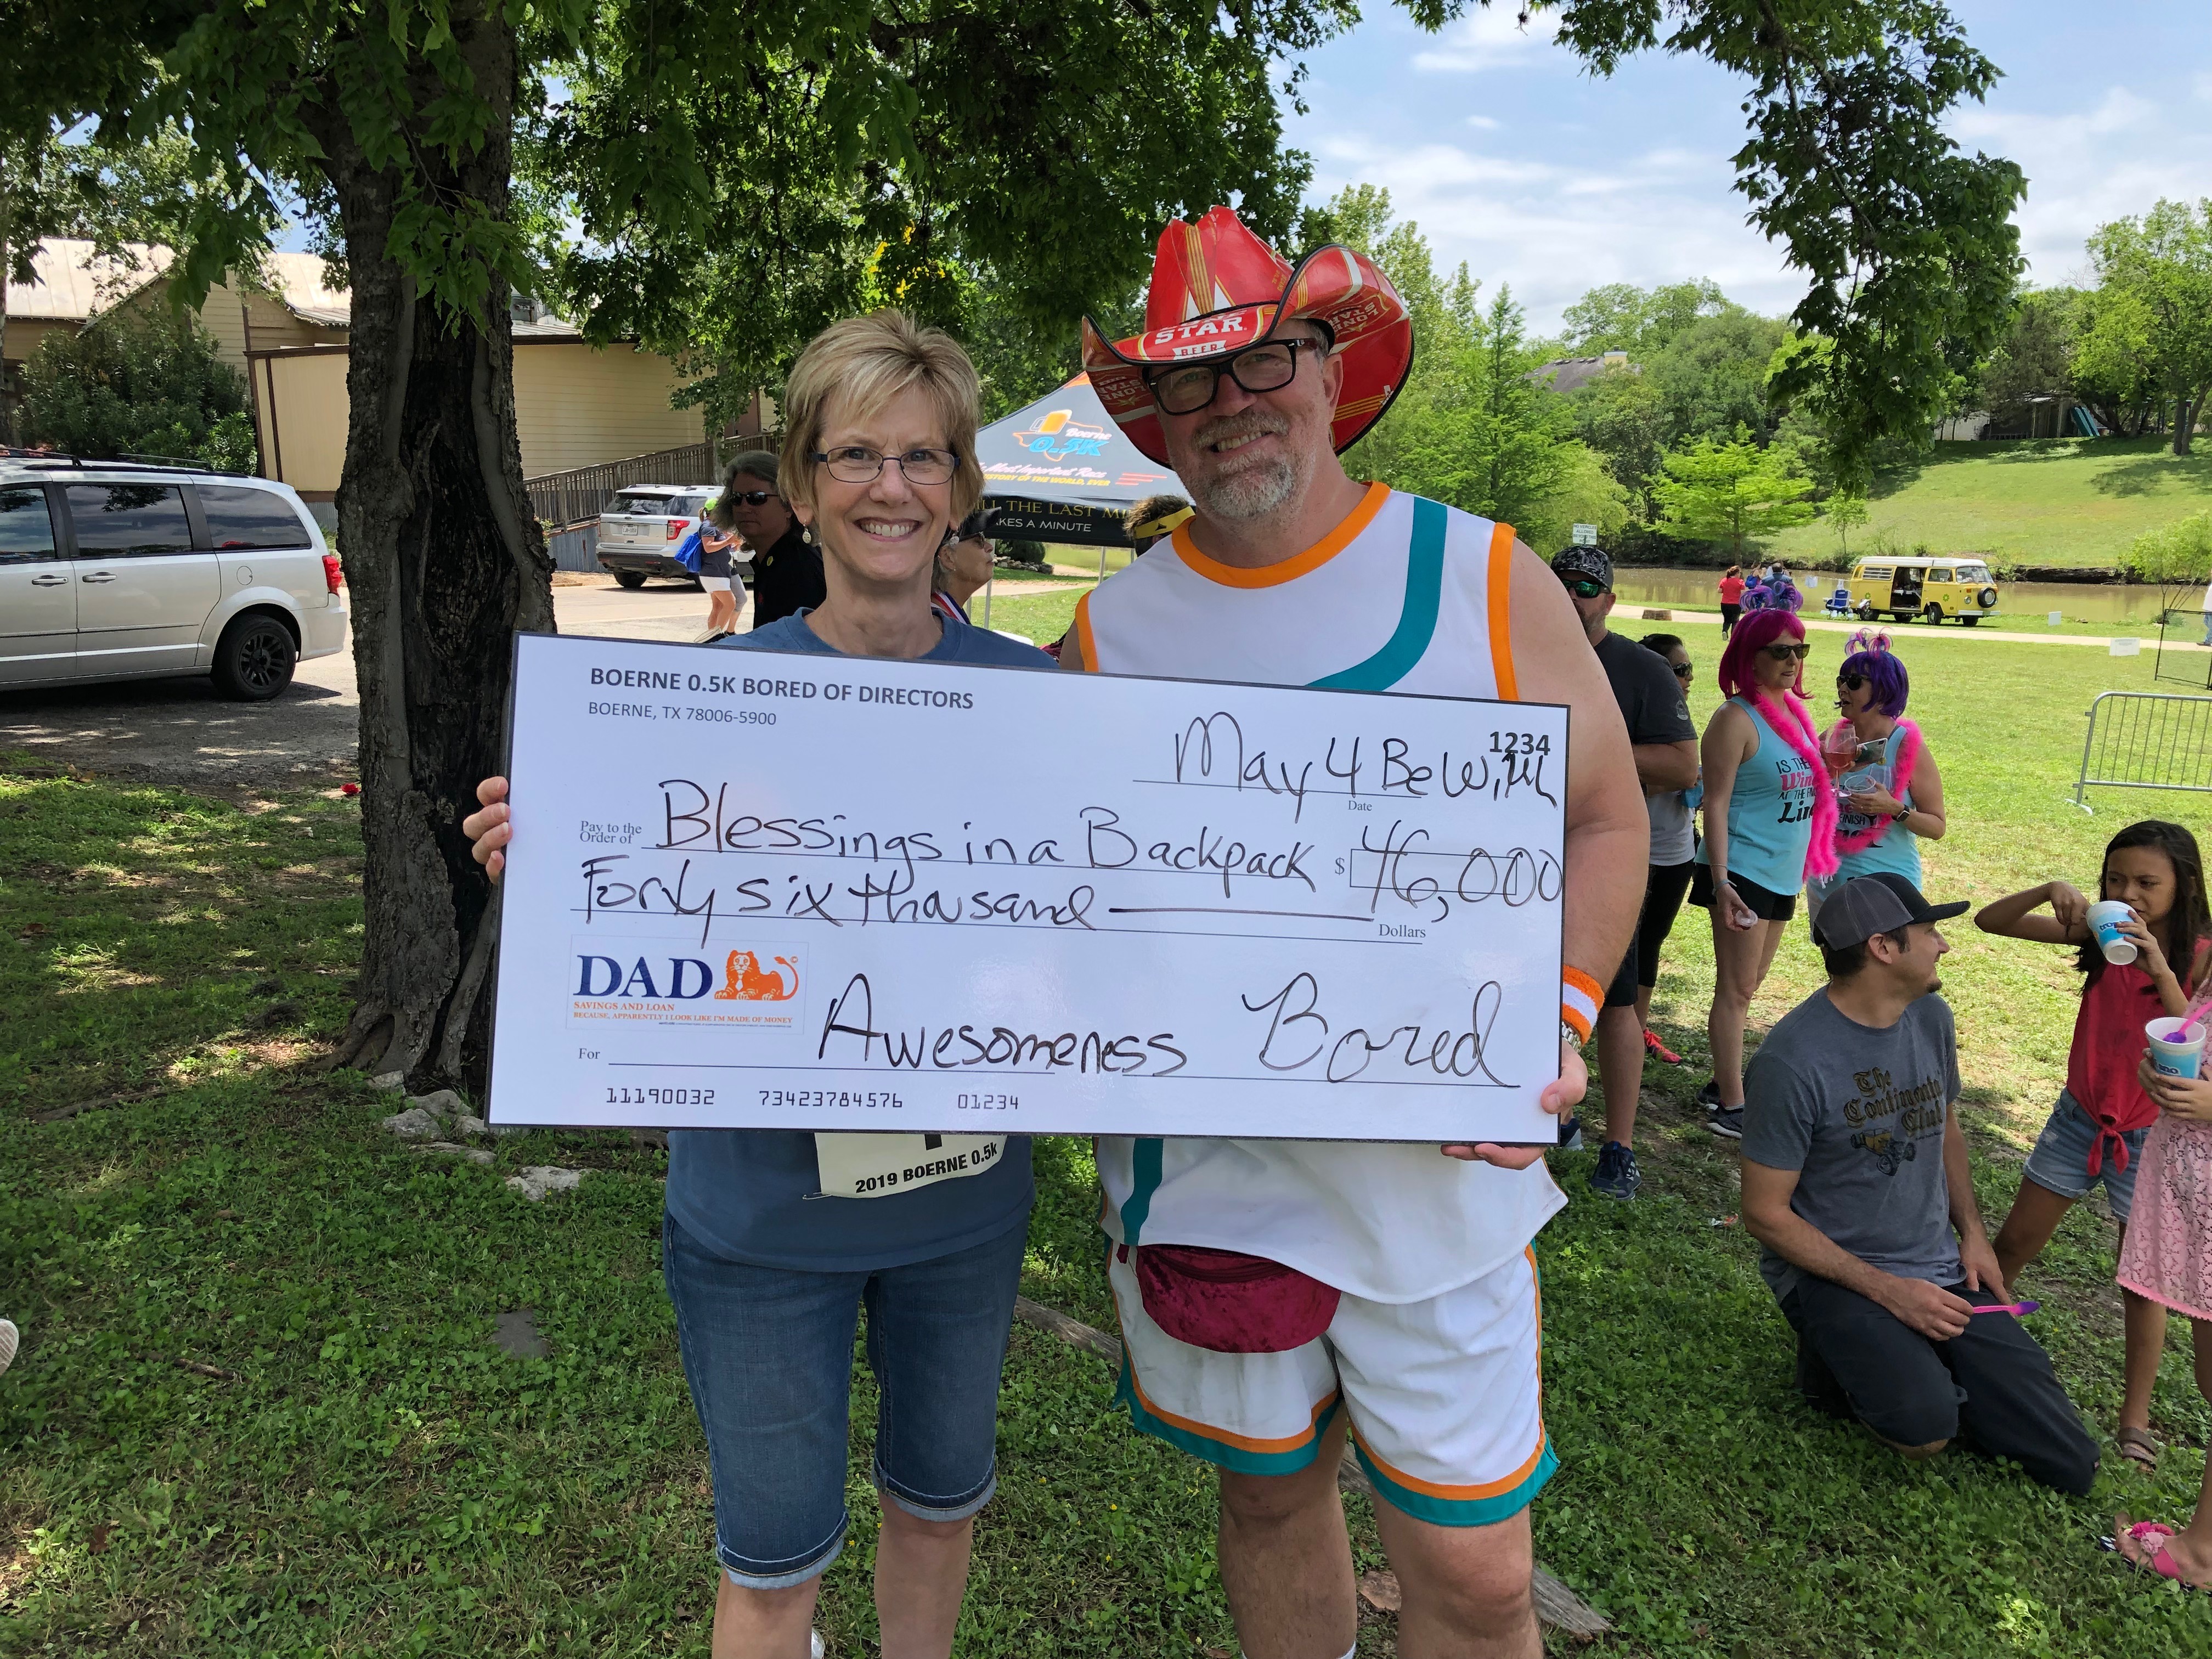 Second Annual Boerne 0.5k “Race” Brings in $46,000 for Local Blessings in a Backpack Program